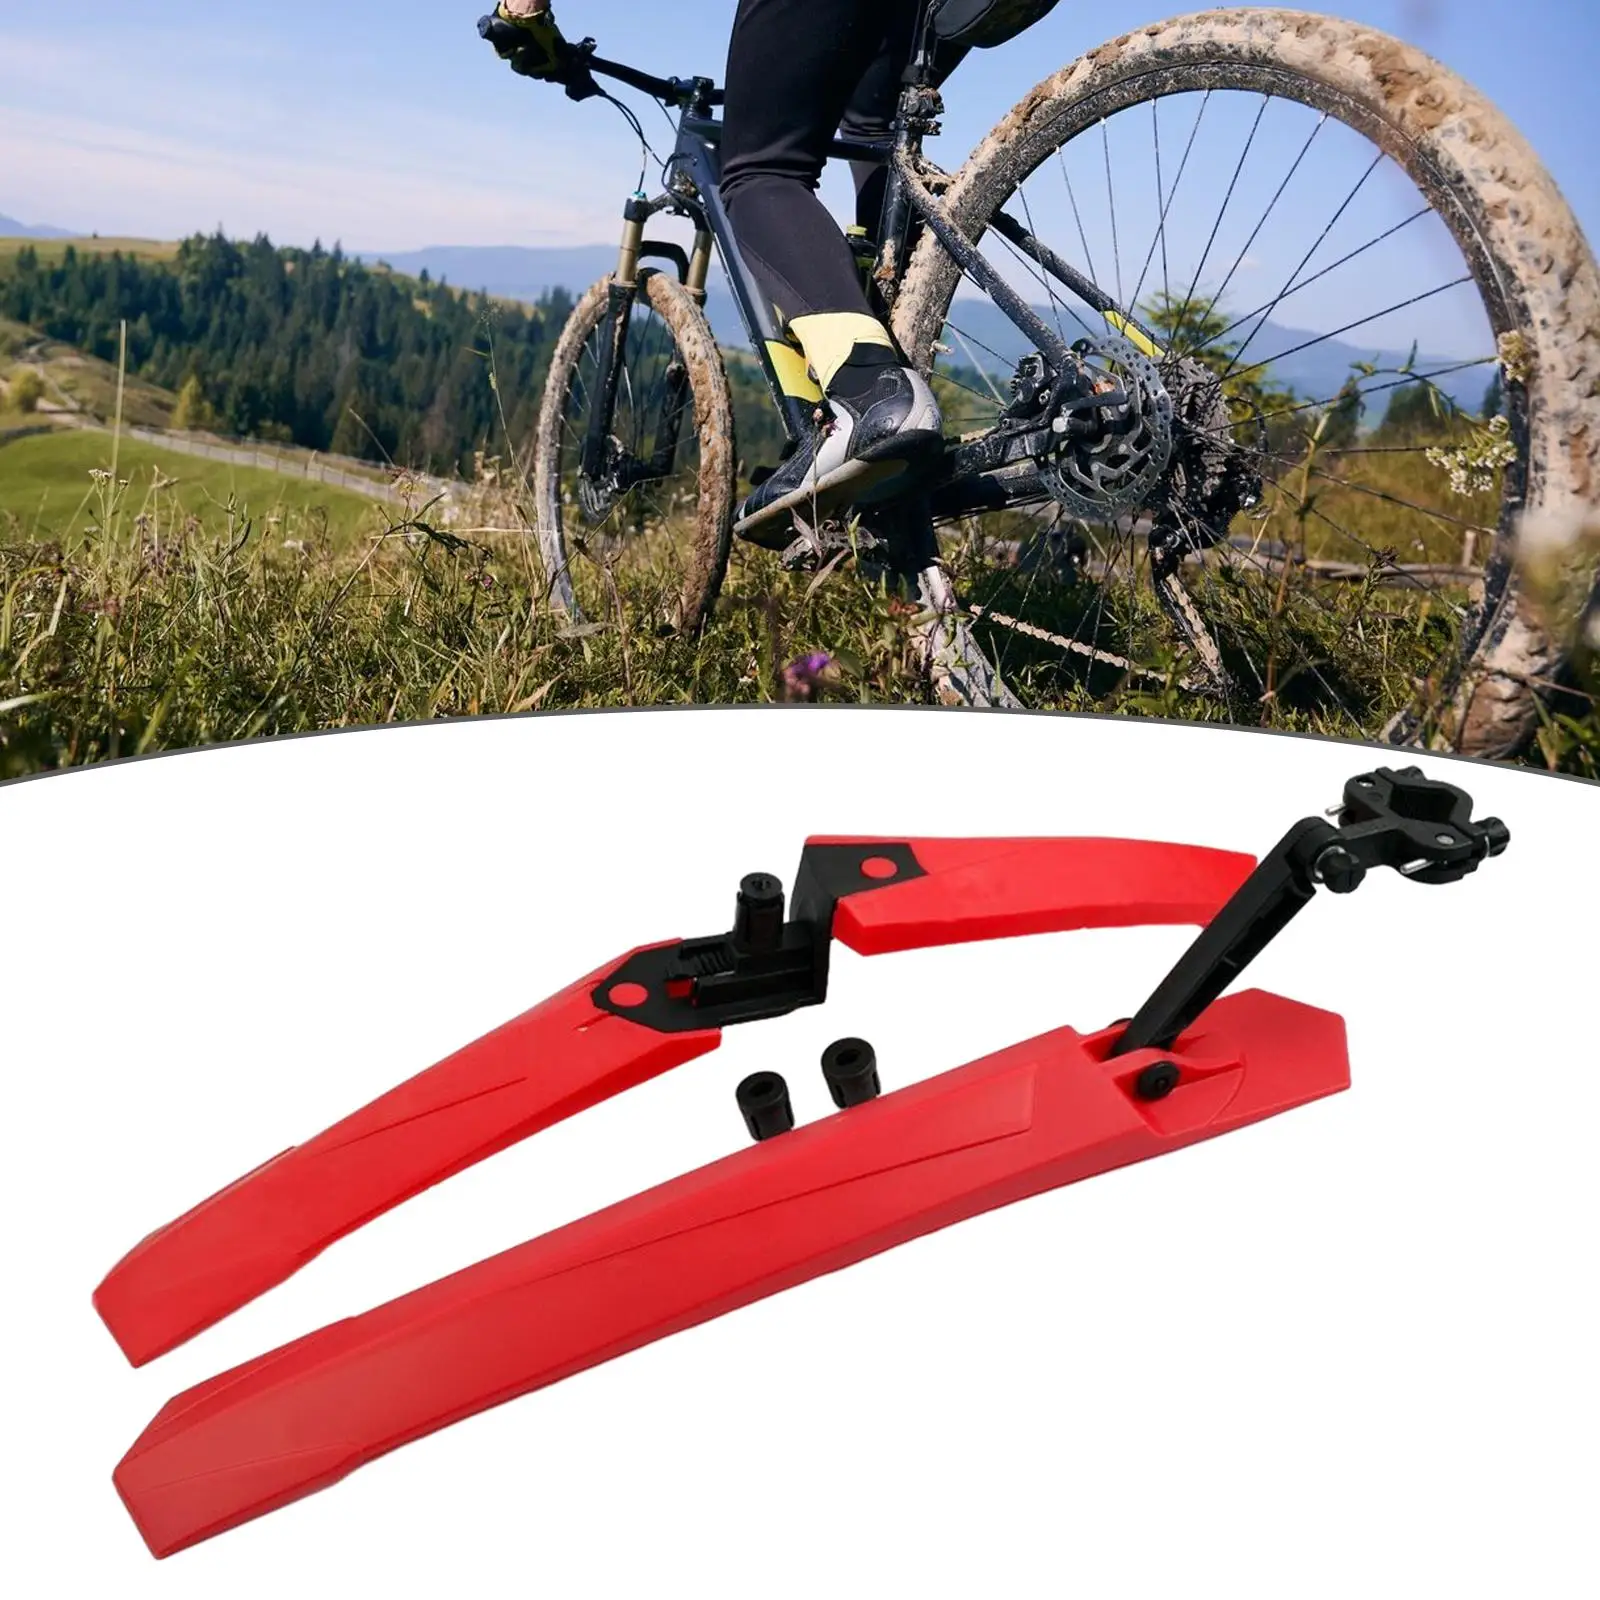 Bike Mudguard Front Rear Set Lightweight Supplies Bicycle Mud Guard Set for Mountain Bike Outdoor Sports Cycling Accessories